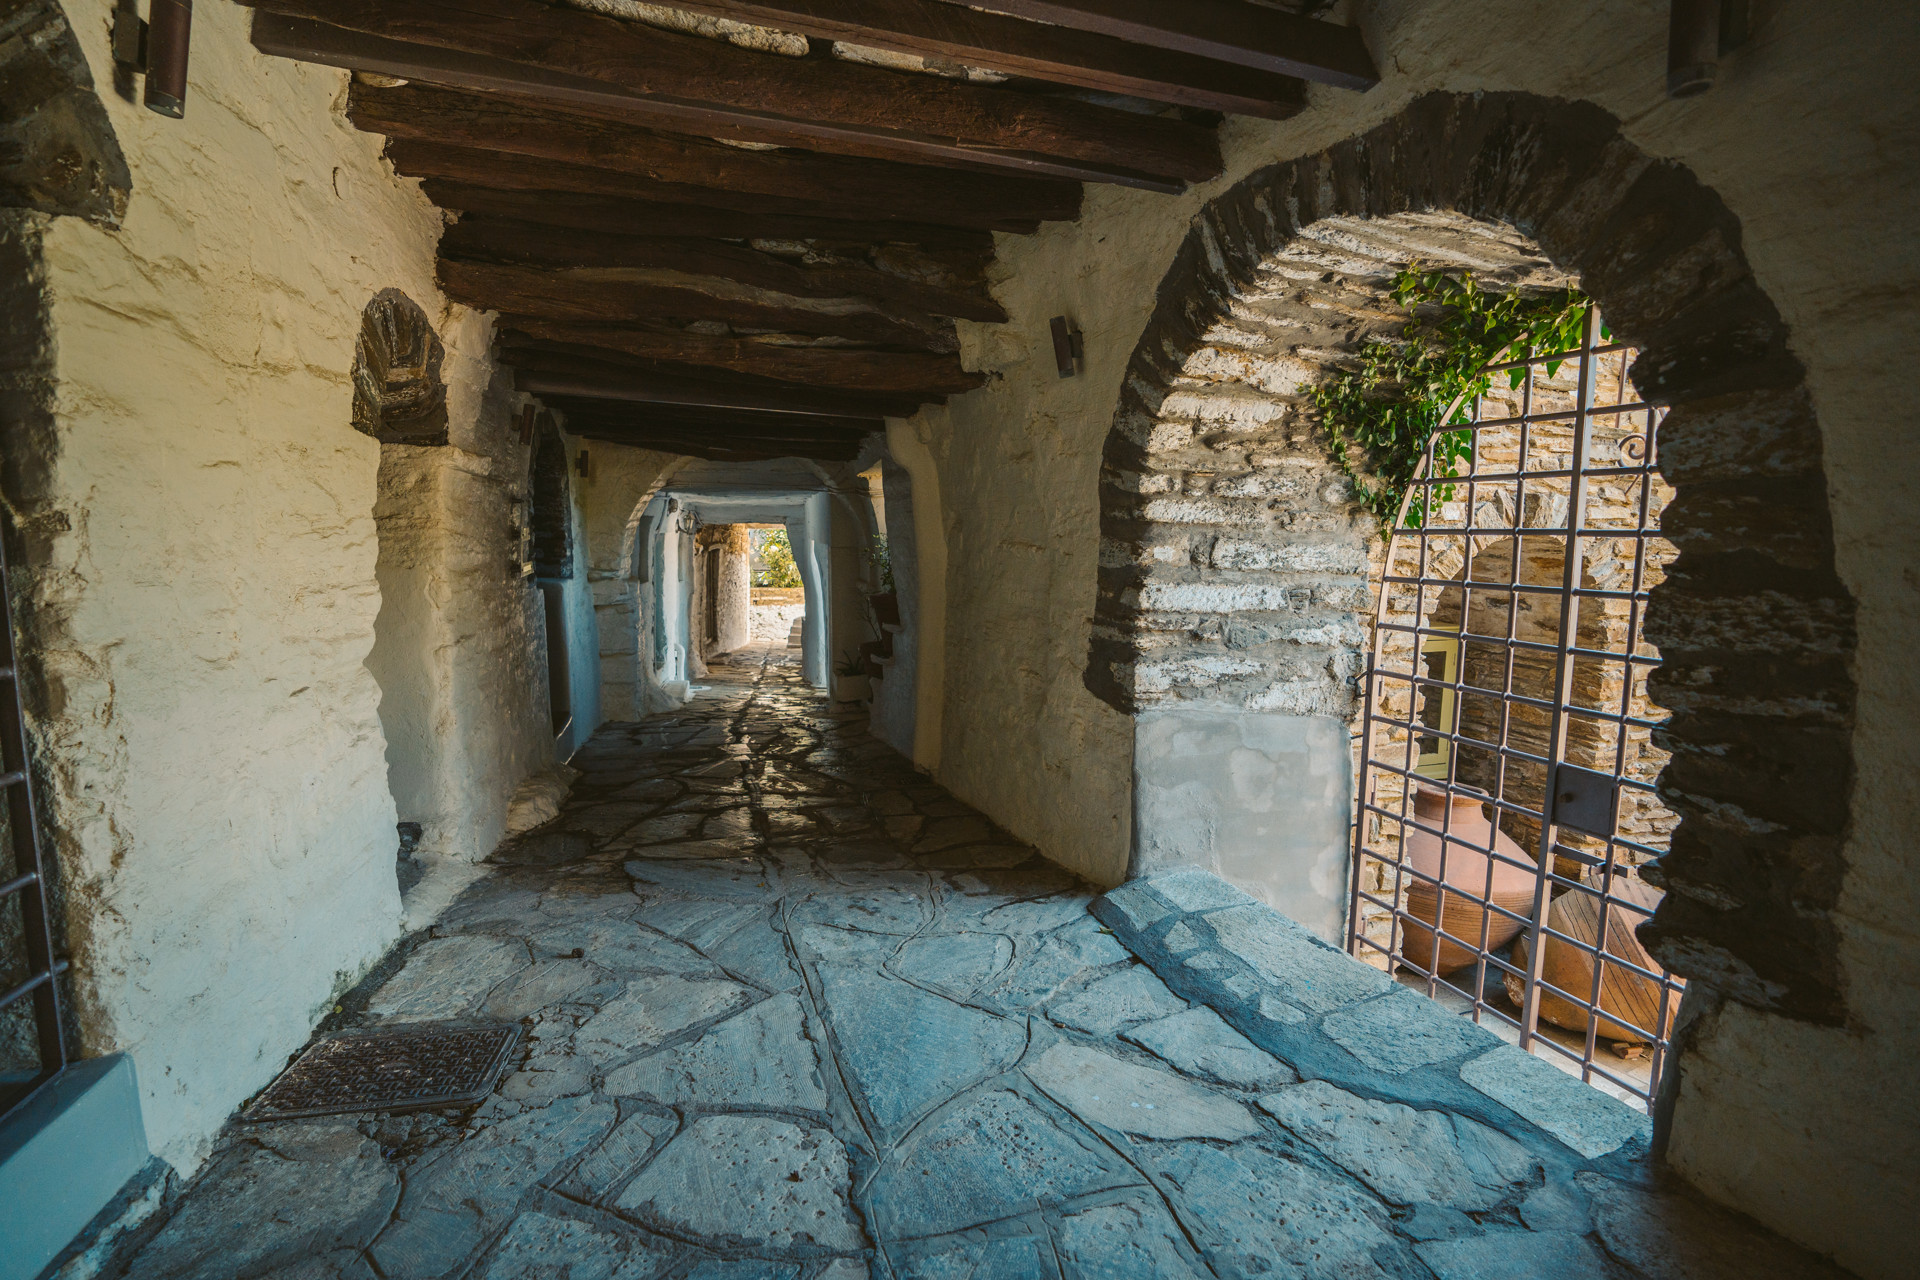 The Venetian arches and arcades of Dio Choria make it different to other villages in Tinos